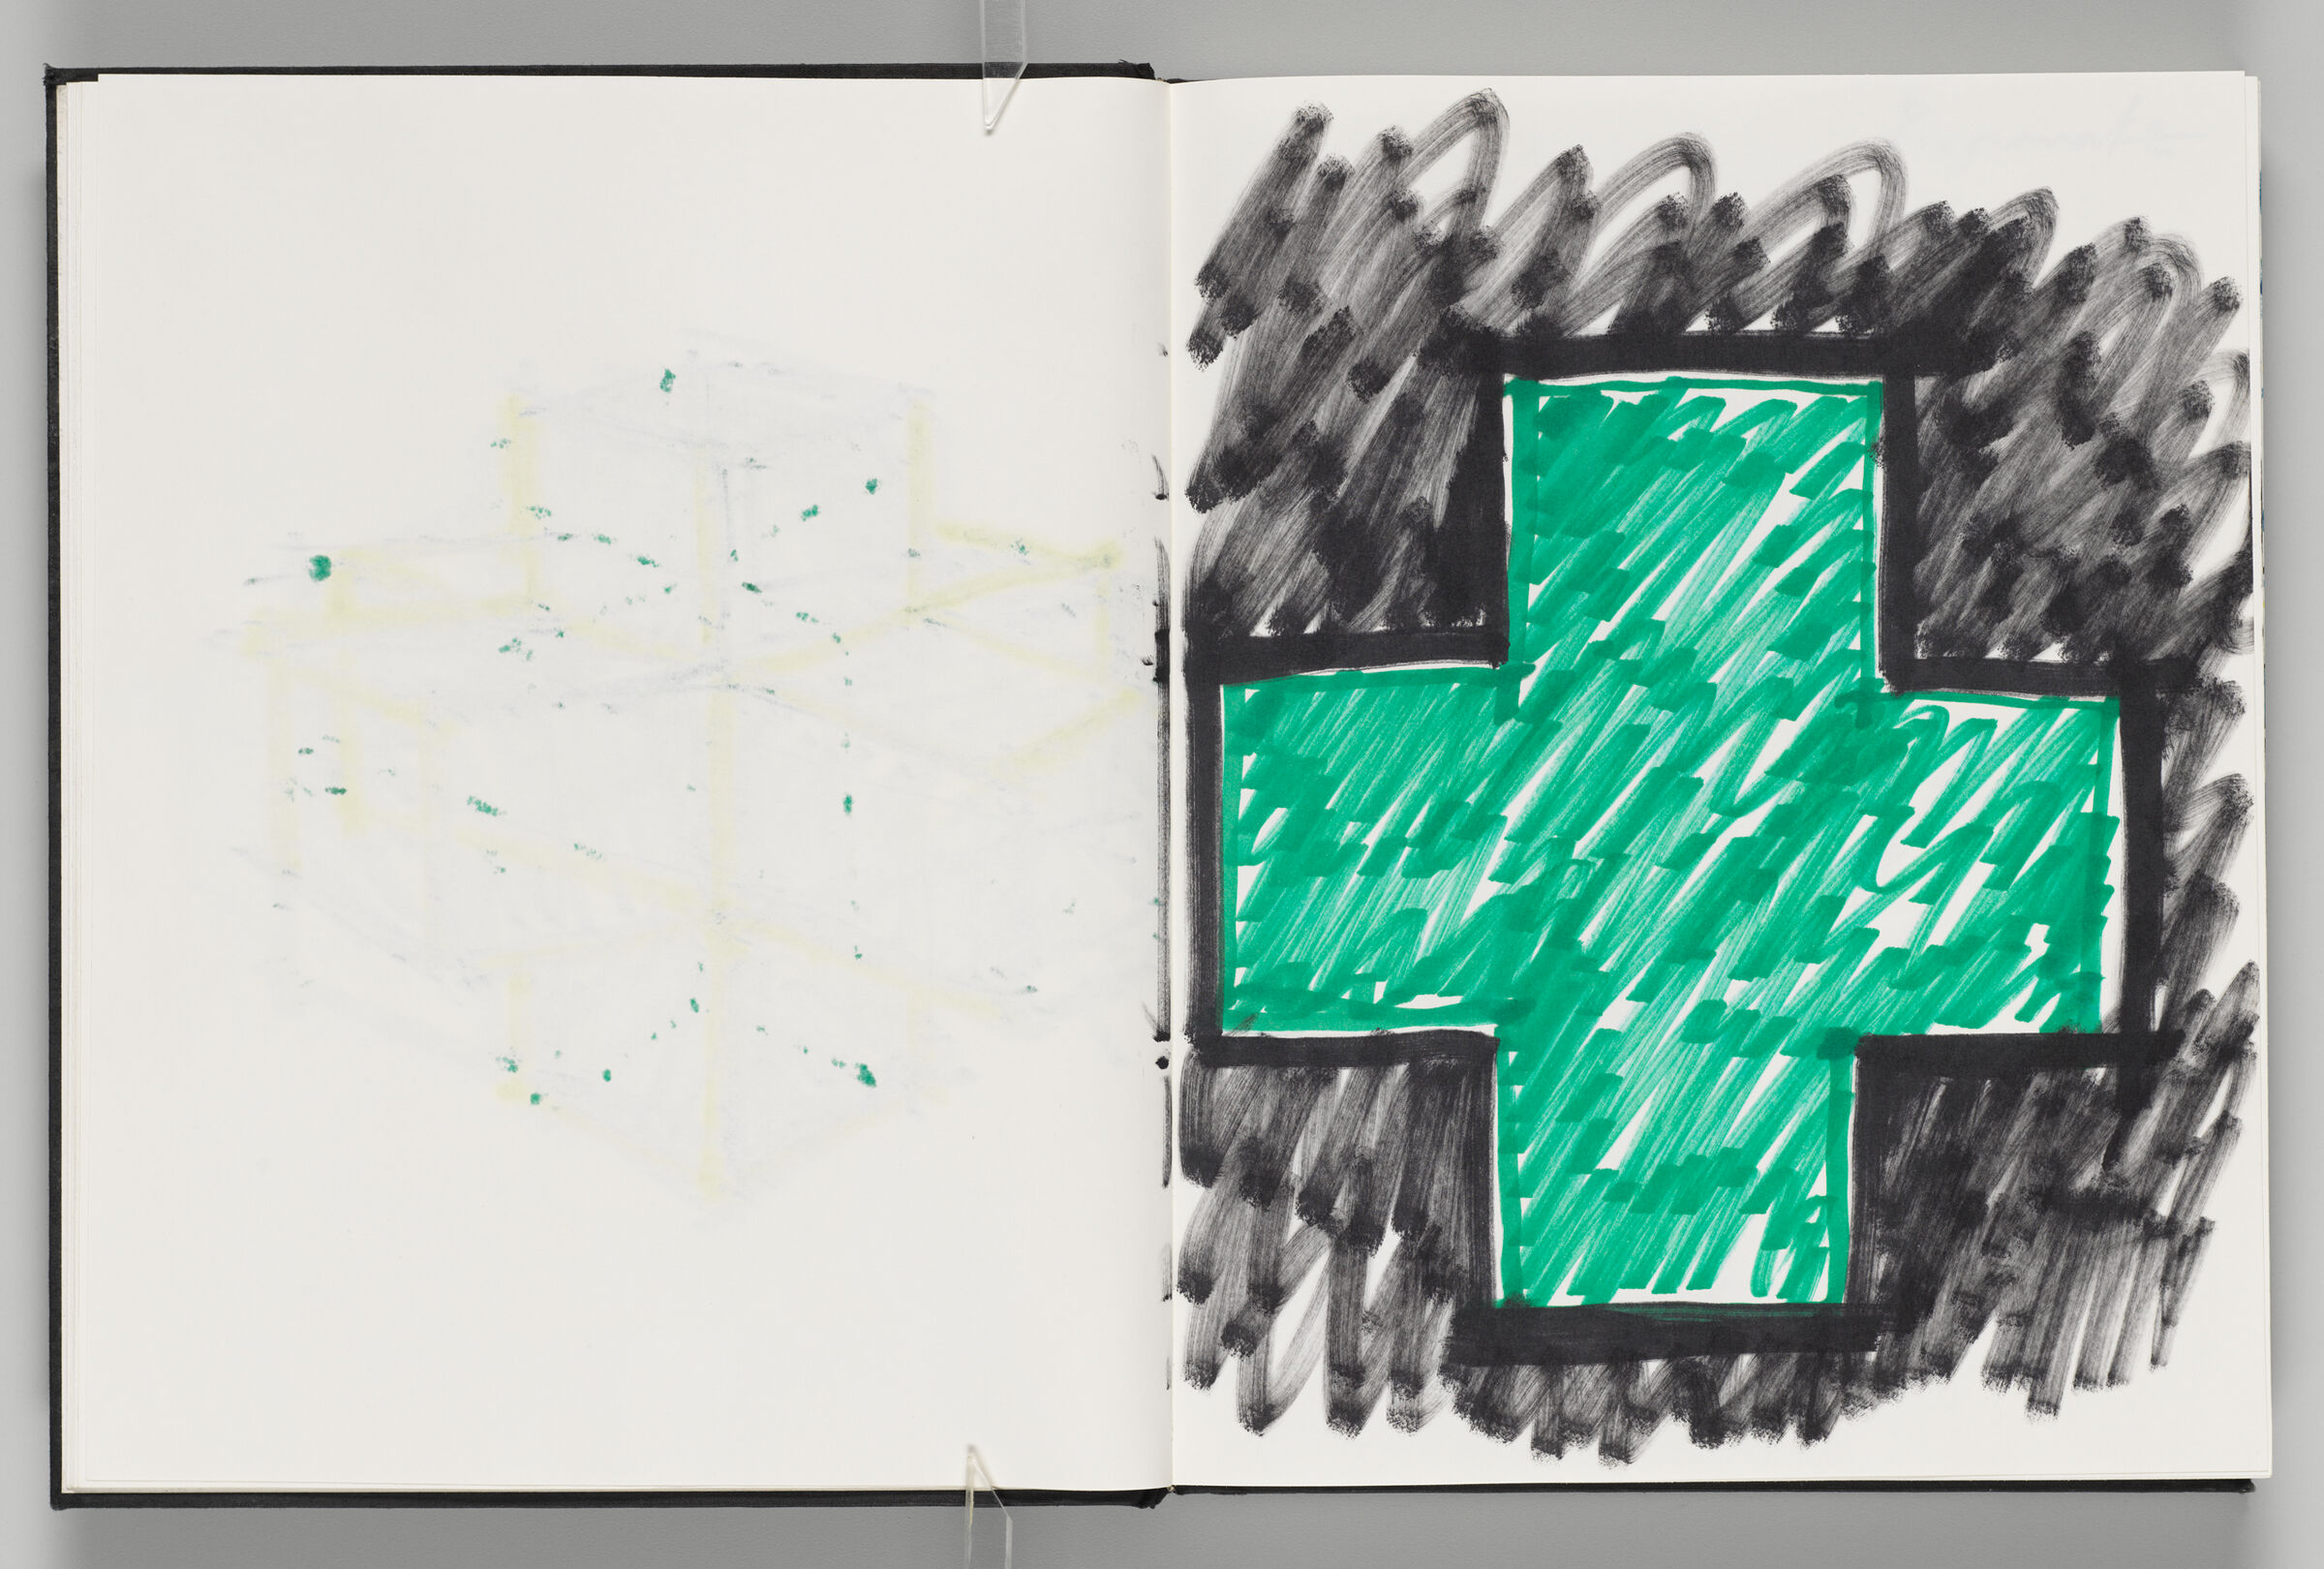 Untitled (Bleed-Through Of Previous Page, Left Page); Untitled (Sketch For Iba Symbol, Right Page)